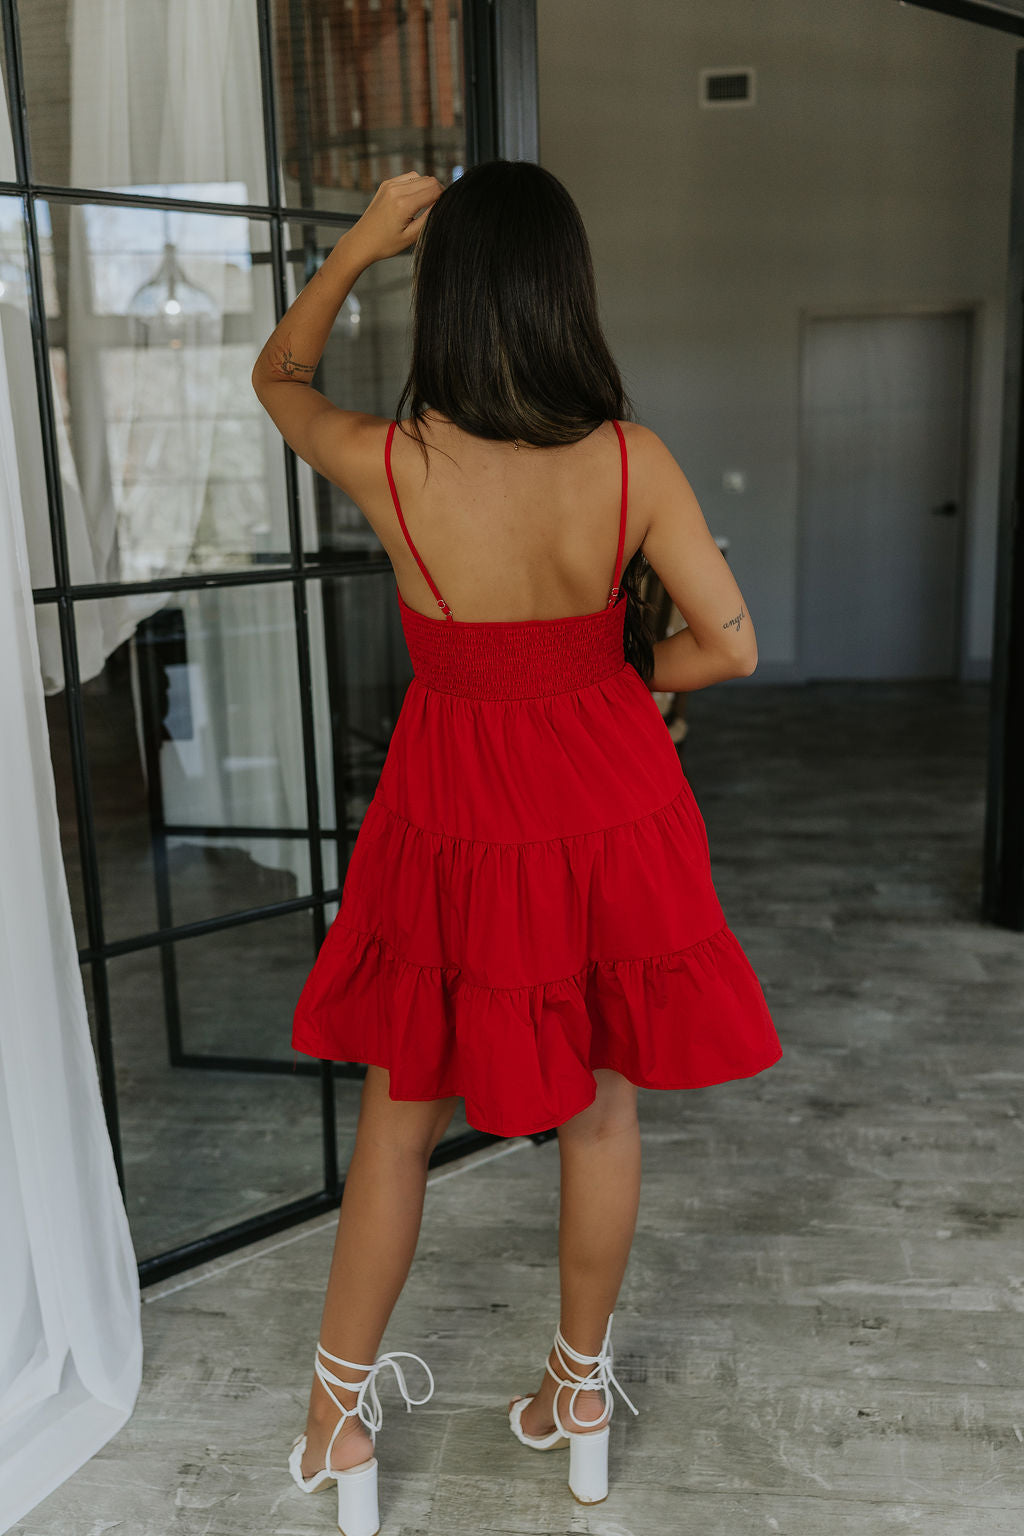 full body back view of model wearing the Loretta Red Sleeveless Mini Dress that has a tiered skirt, surplice neckline, and thin straps. Worn with white heels.